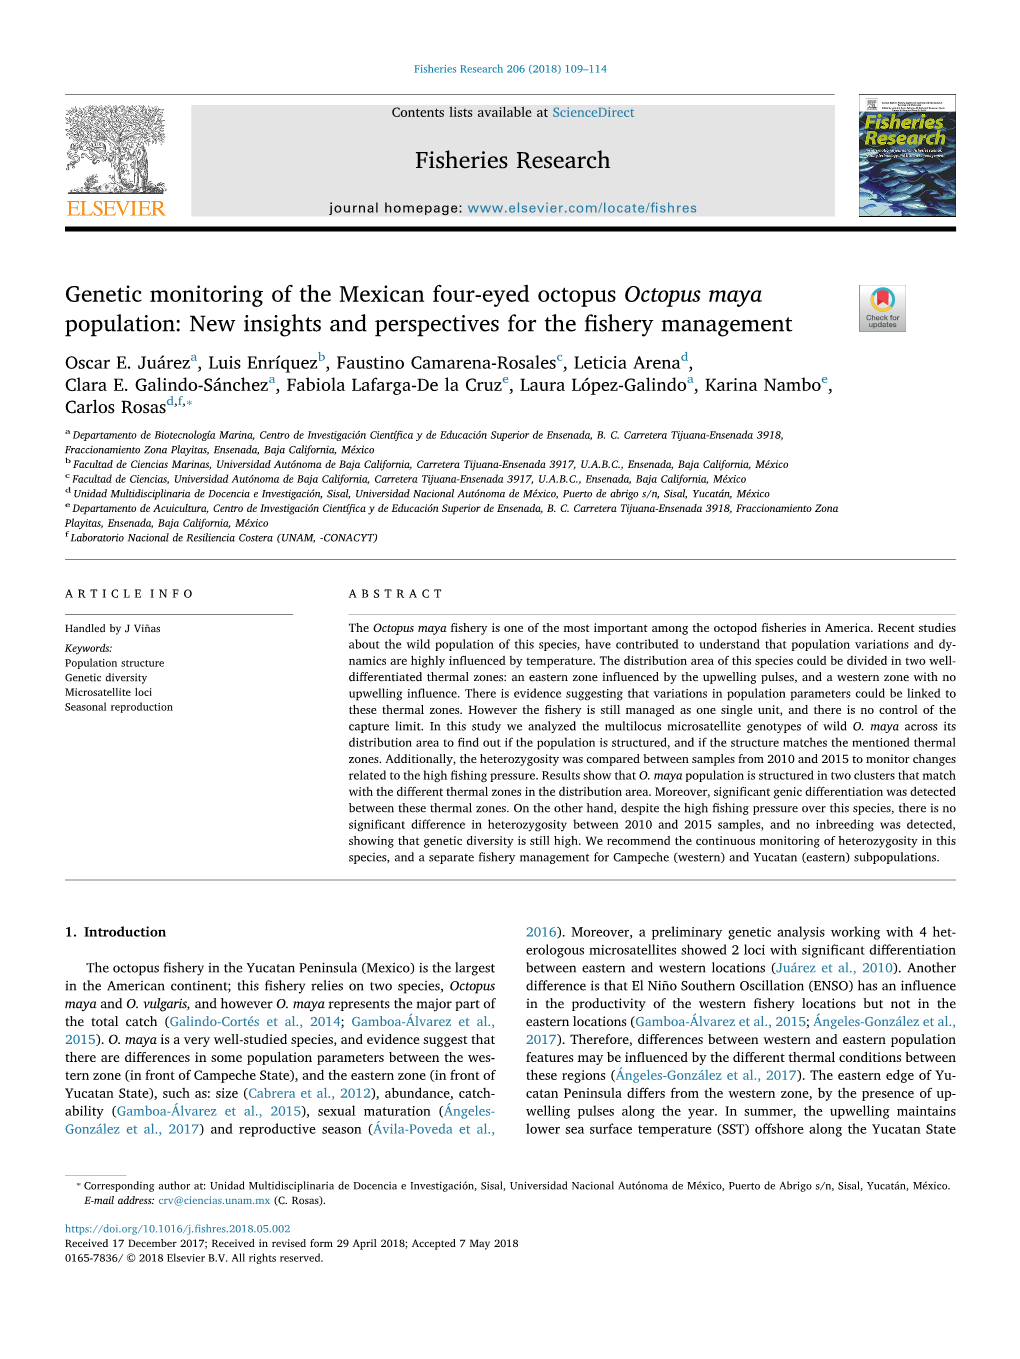 Genetic Monitoring of the Mexican Four-Eyed Octopus Octopus Maya T Population: New Insights and Perspectives for the ﬁshery Management